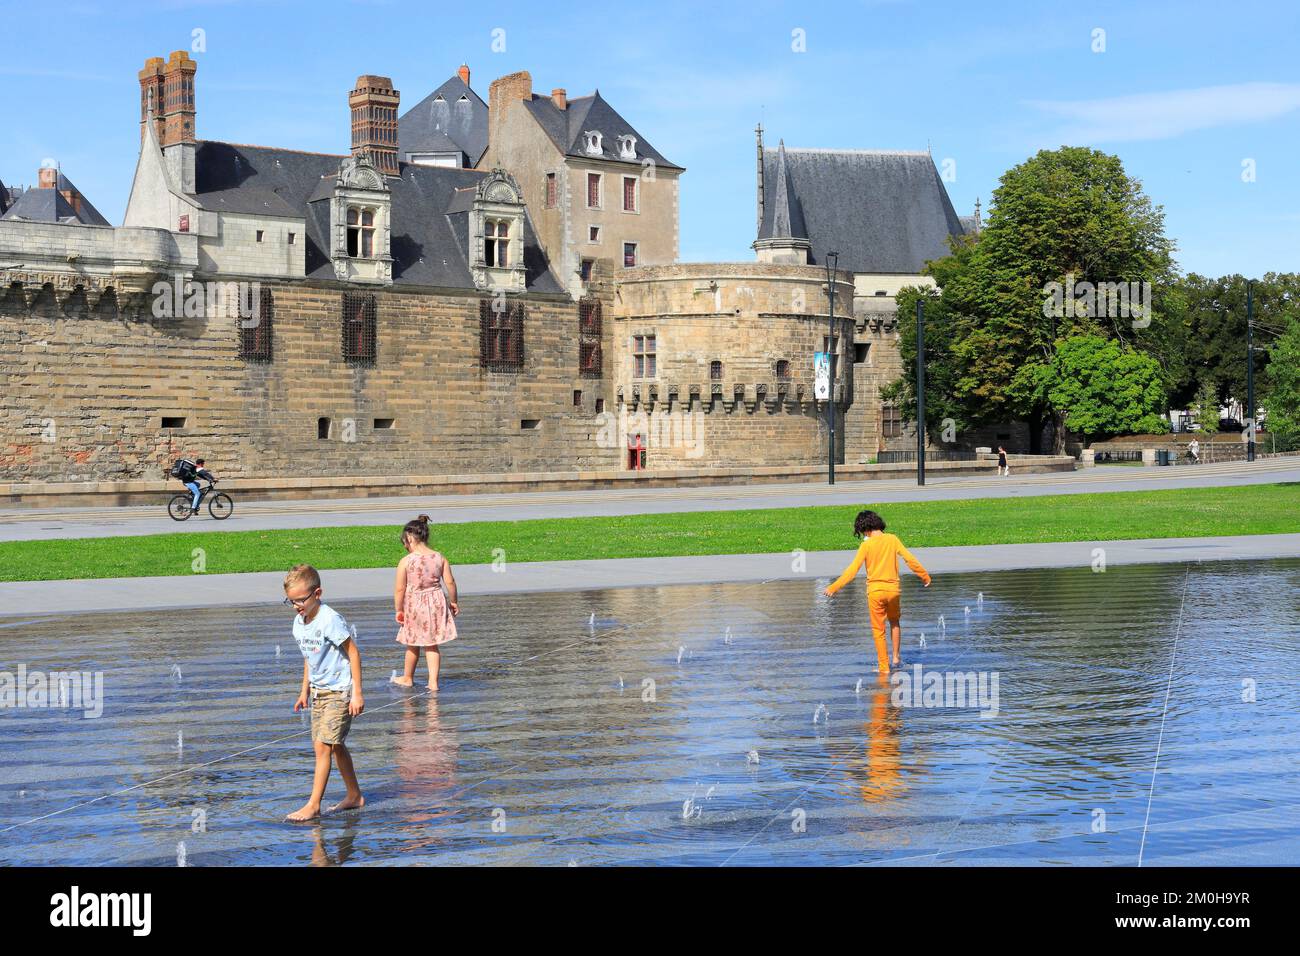 France, Loire Atlantique, Nantes, Elisa Mercoeur square , children playing with the water mirror designed by the architect Bruno Fortier with the castle of the Dukes of Brittany in the background Stock Photo